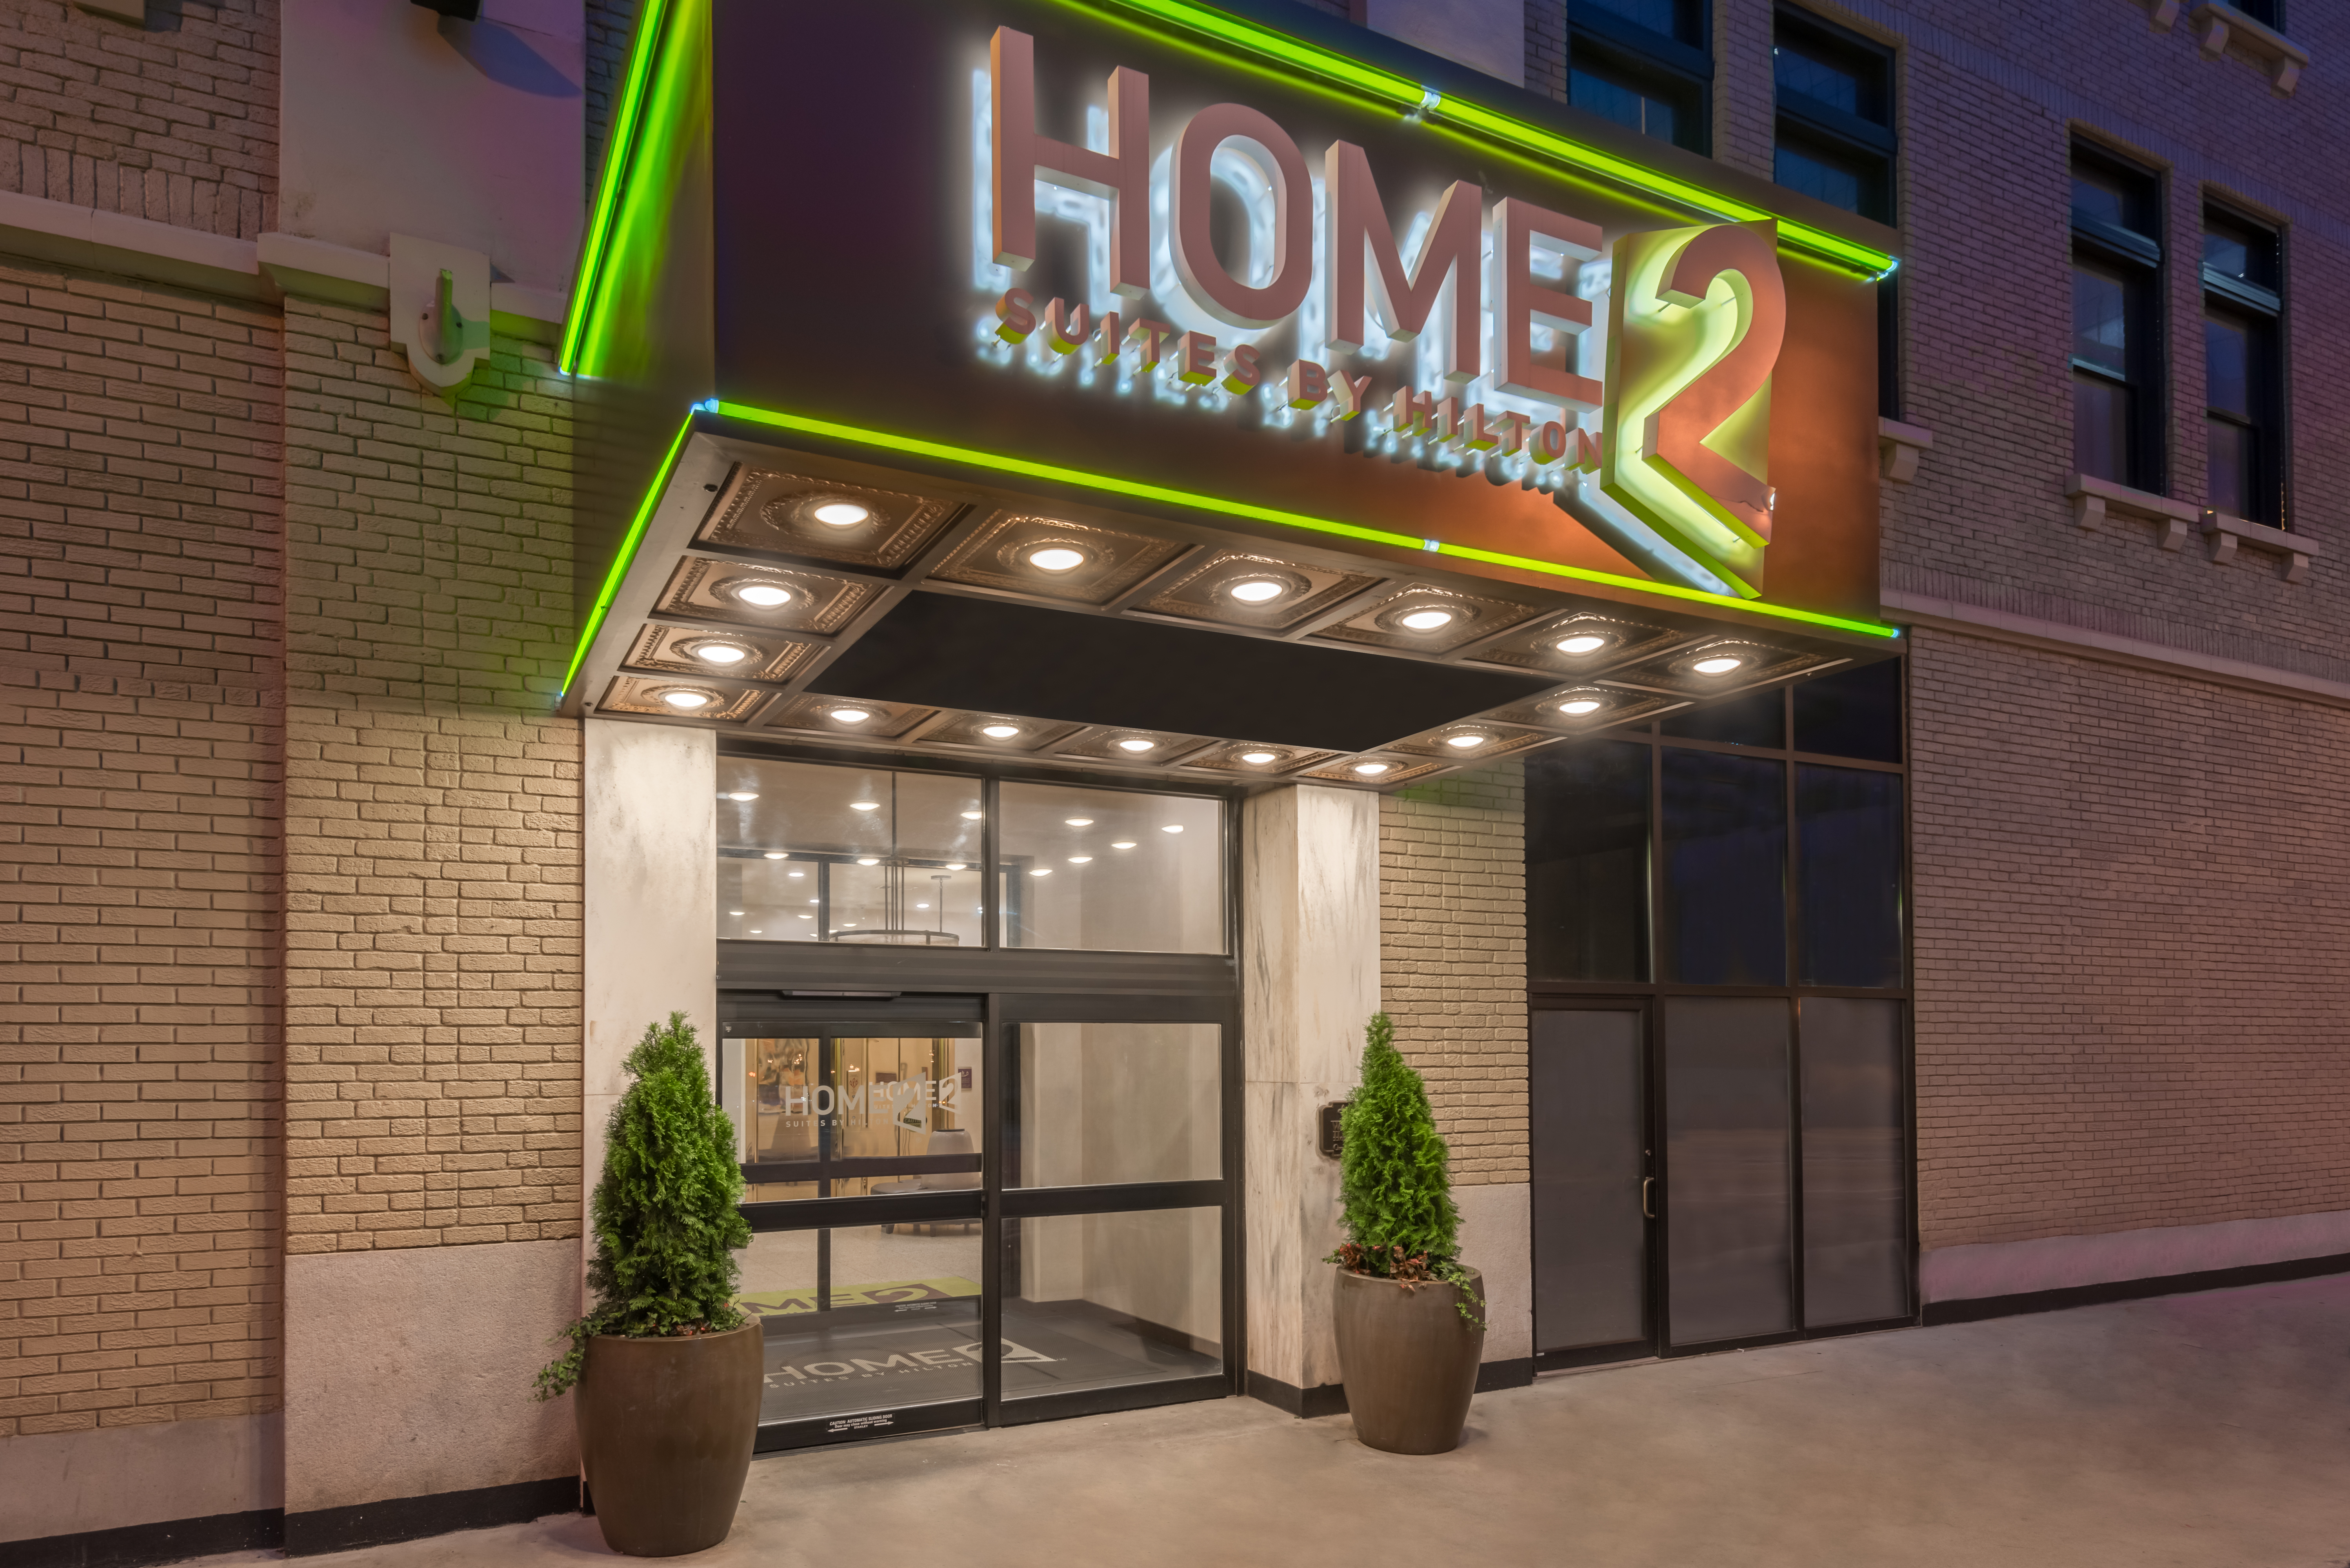  Home2 Suites by Hilton Atlanta Downtown, GA - Entrance with Neon Sign